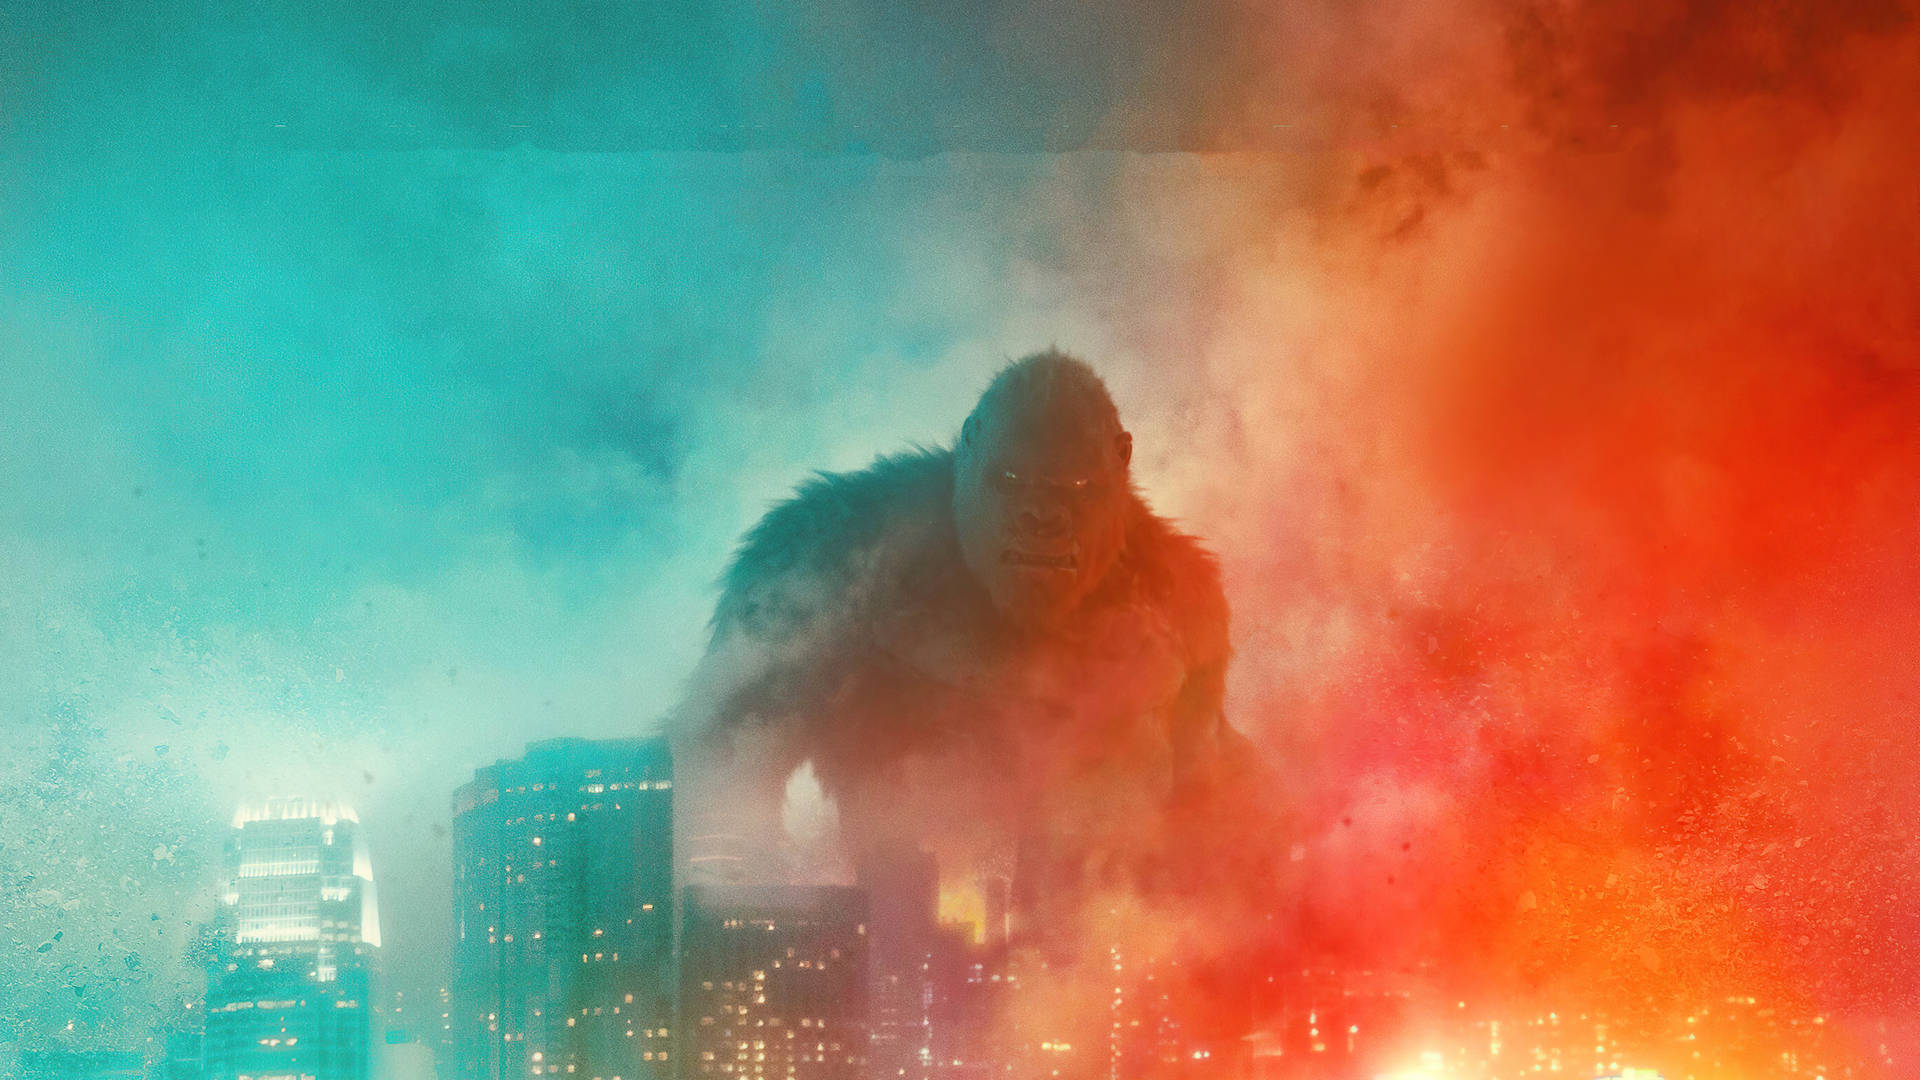 kong - the gorilla in the city Wallpaper